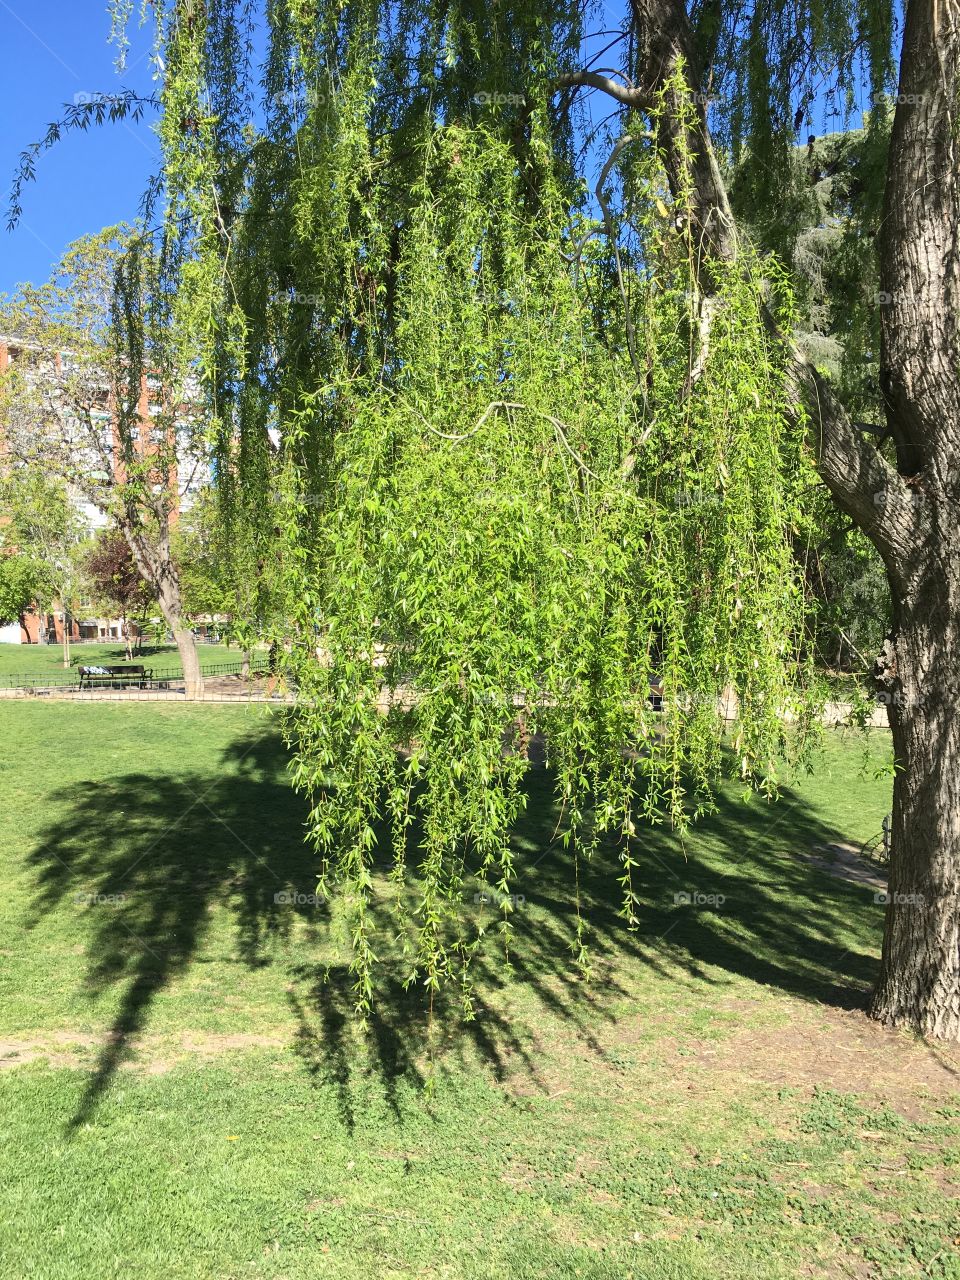 Weeping willow 